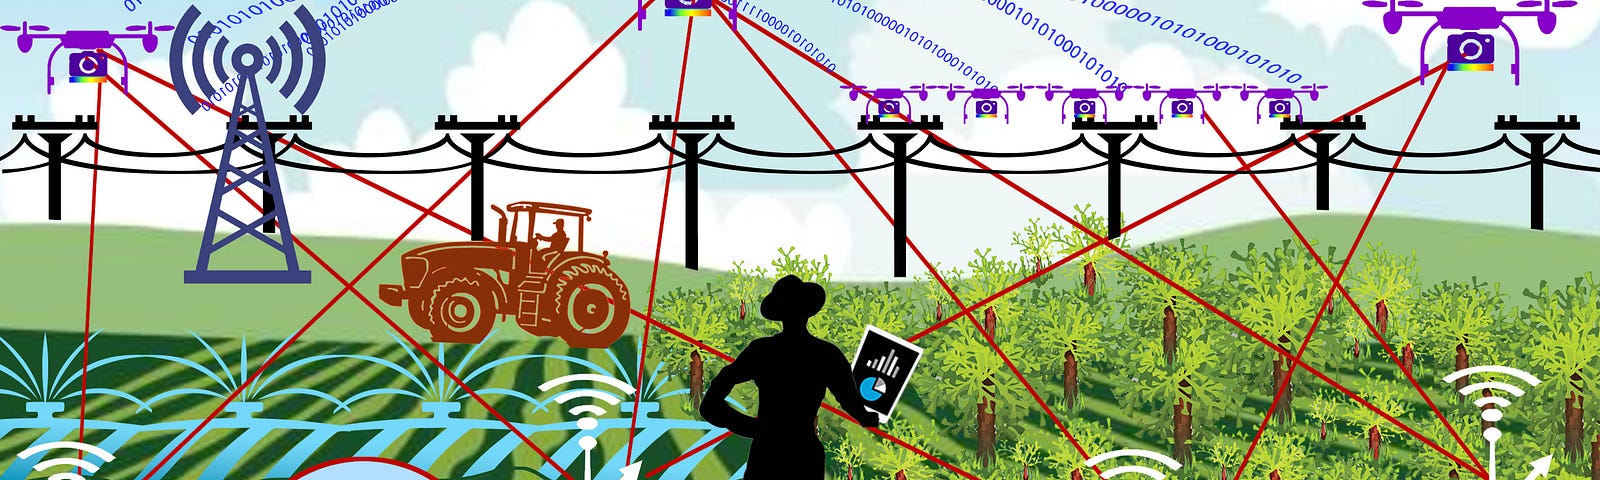 An illustration depicting a complex network between soil sensors, flying robots, the internet and a farmer.